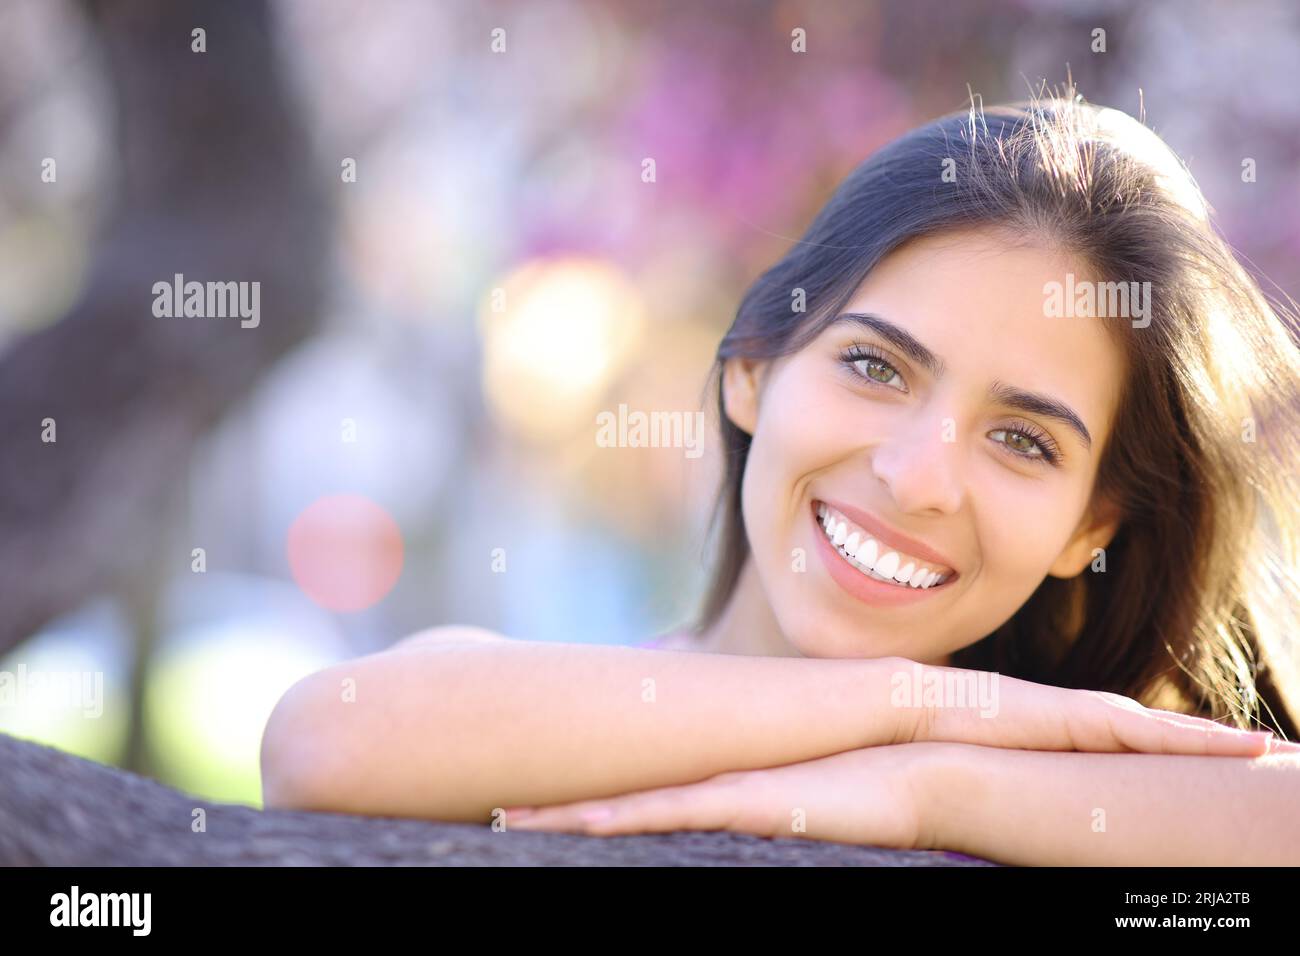 Front view portrait of a happy woman with white smile in a park Stock Photo